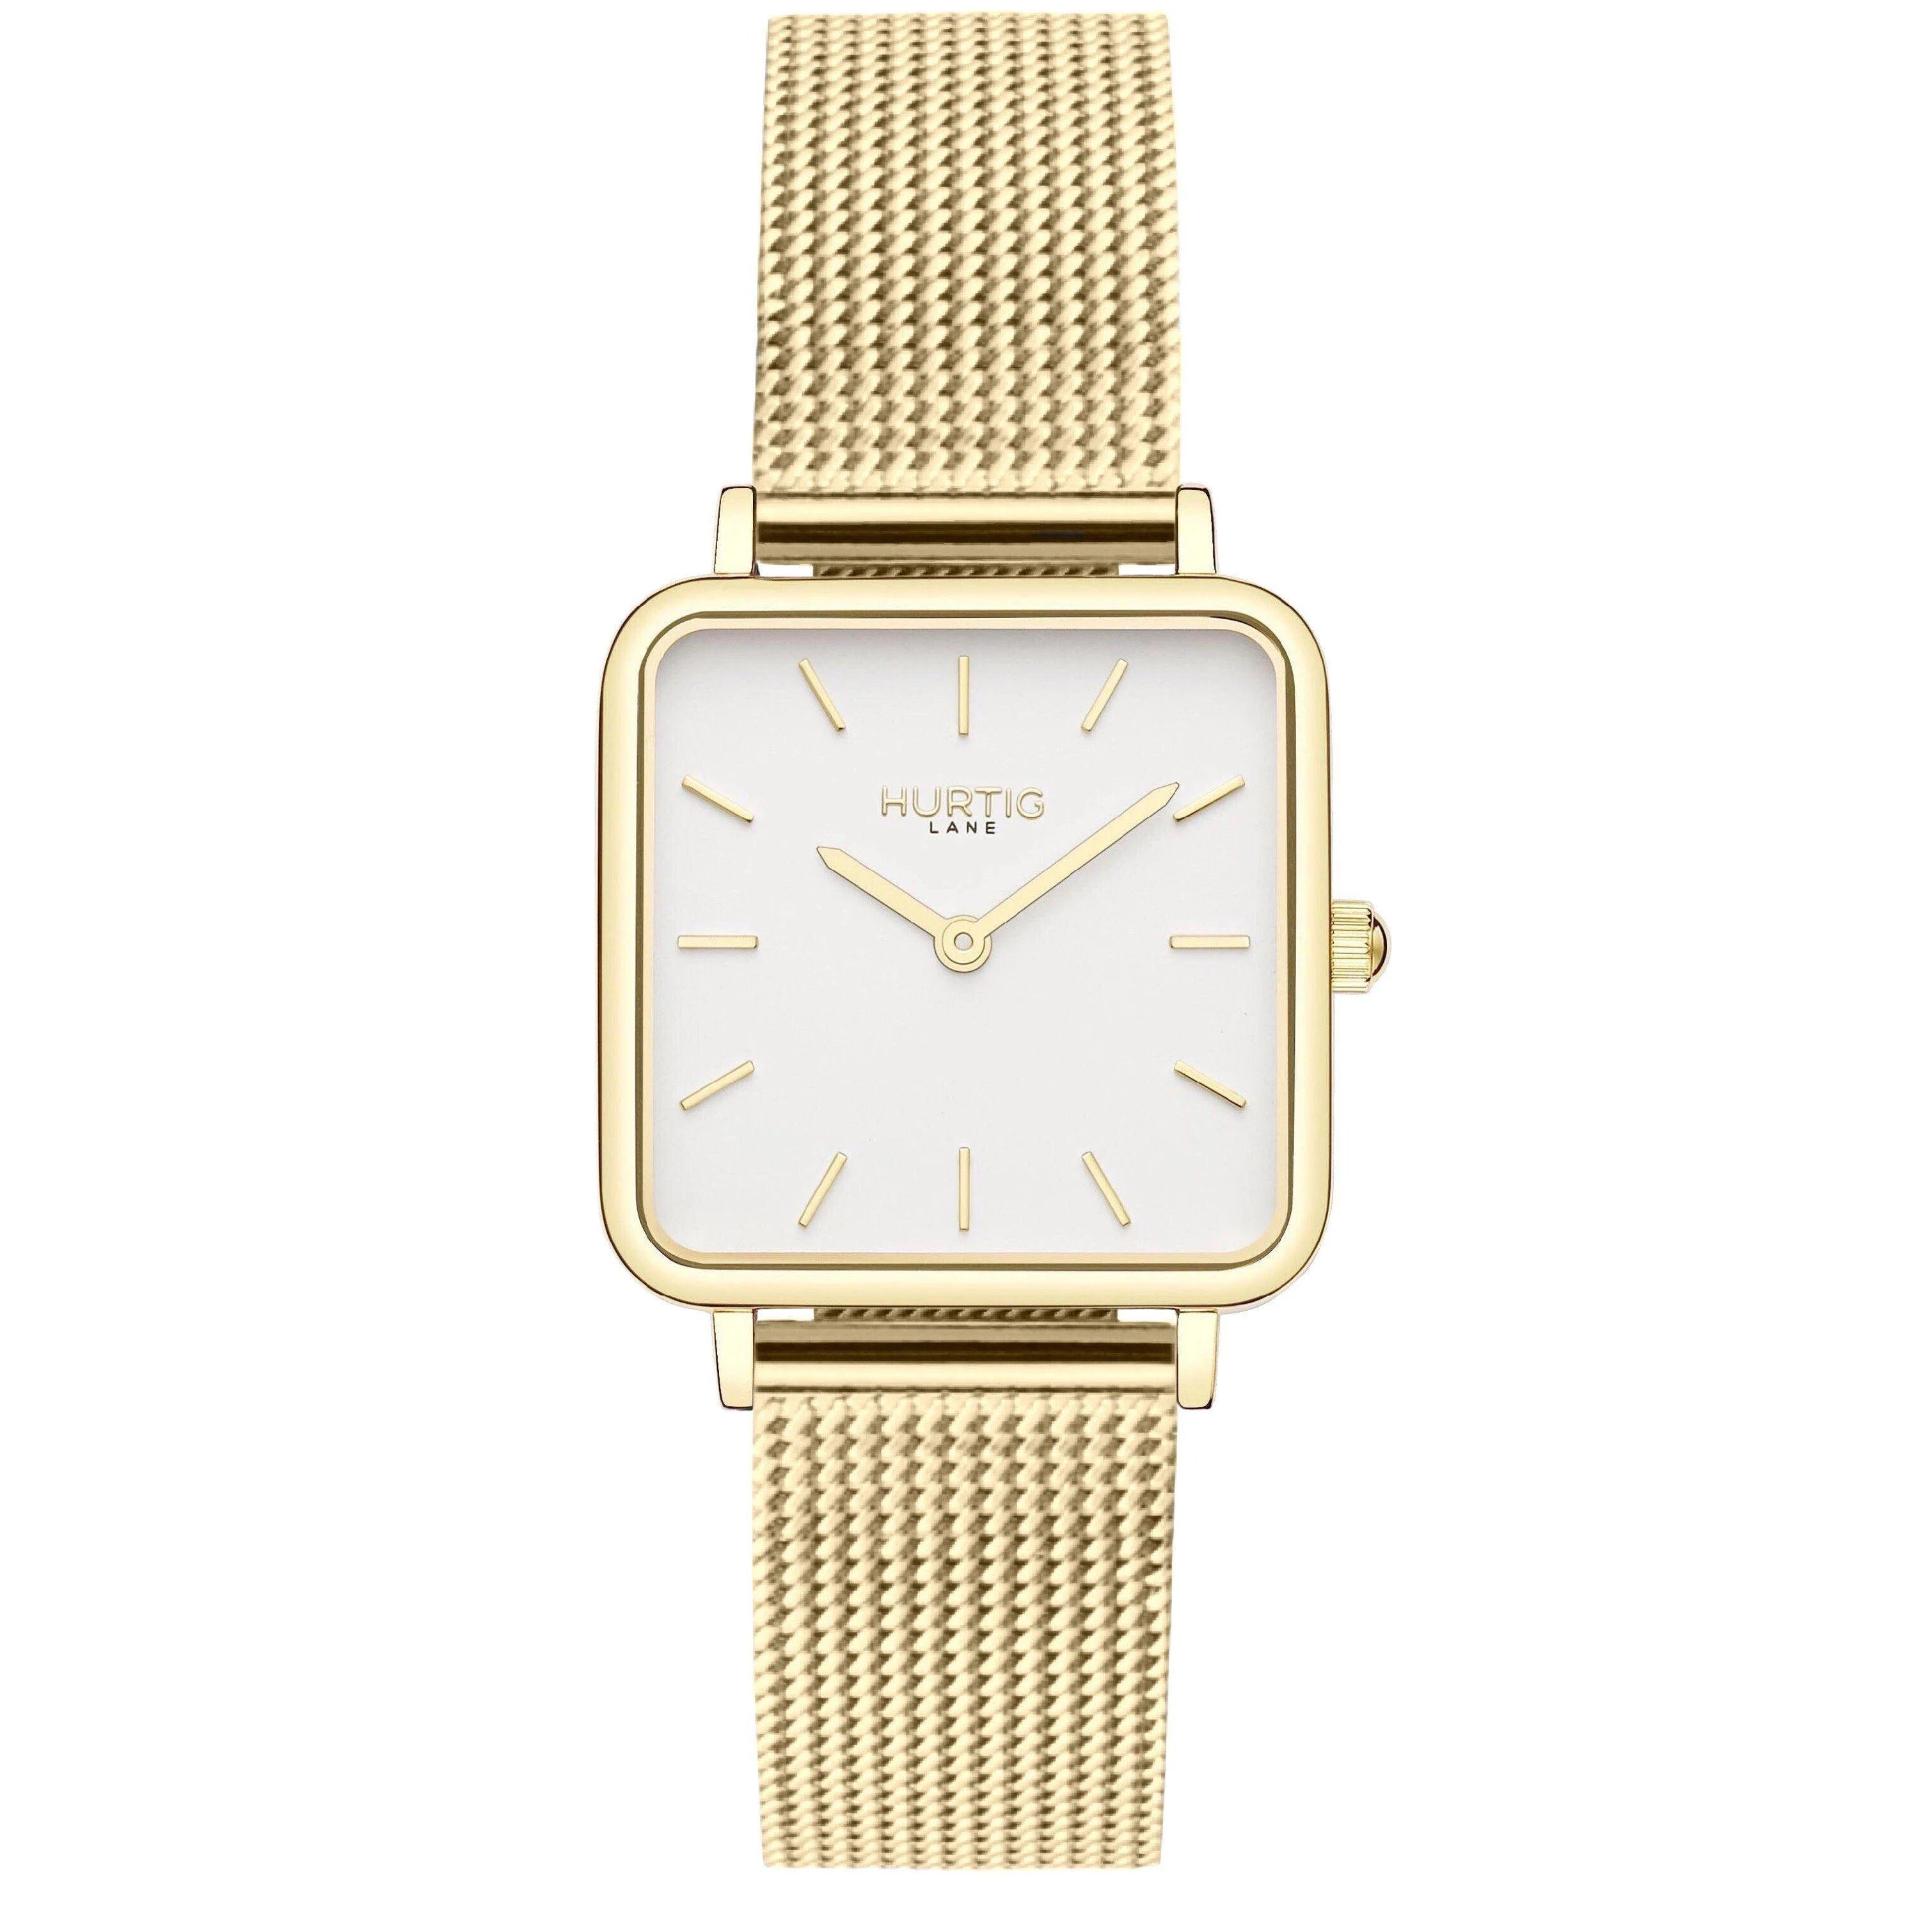 Neliö Square Stainless Steel Watch Gold, White & Gold